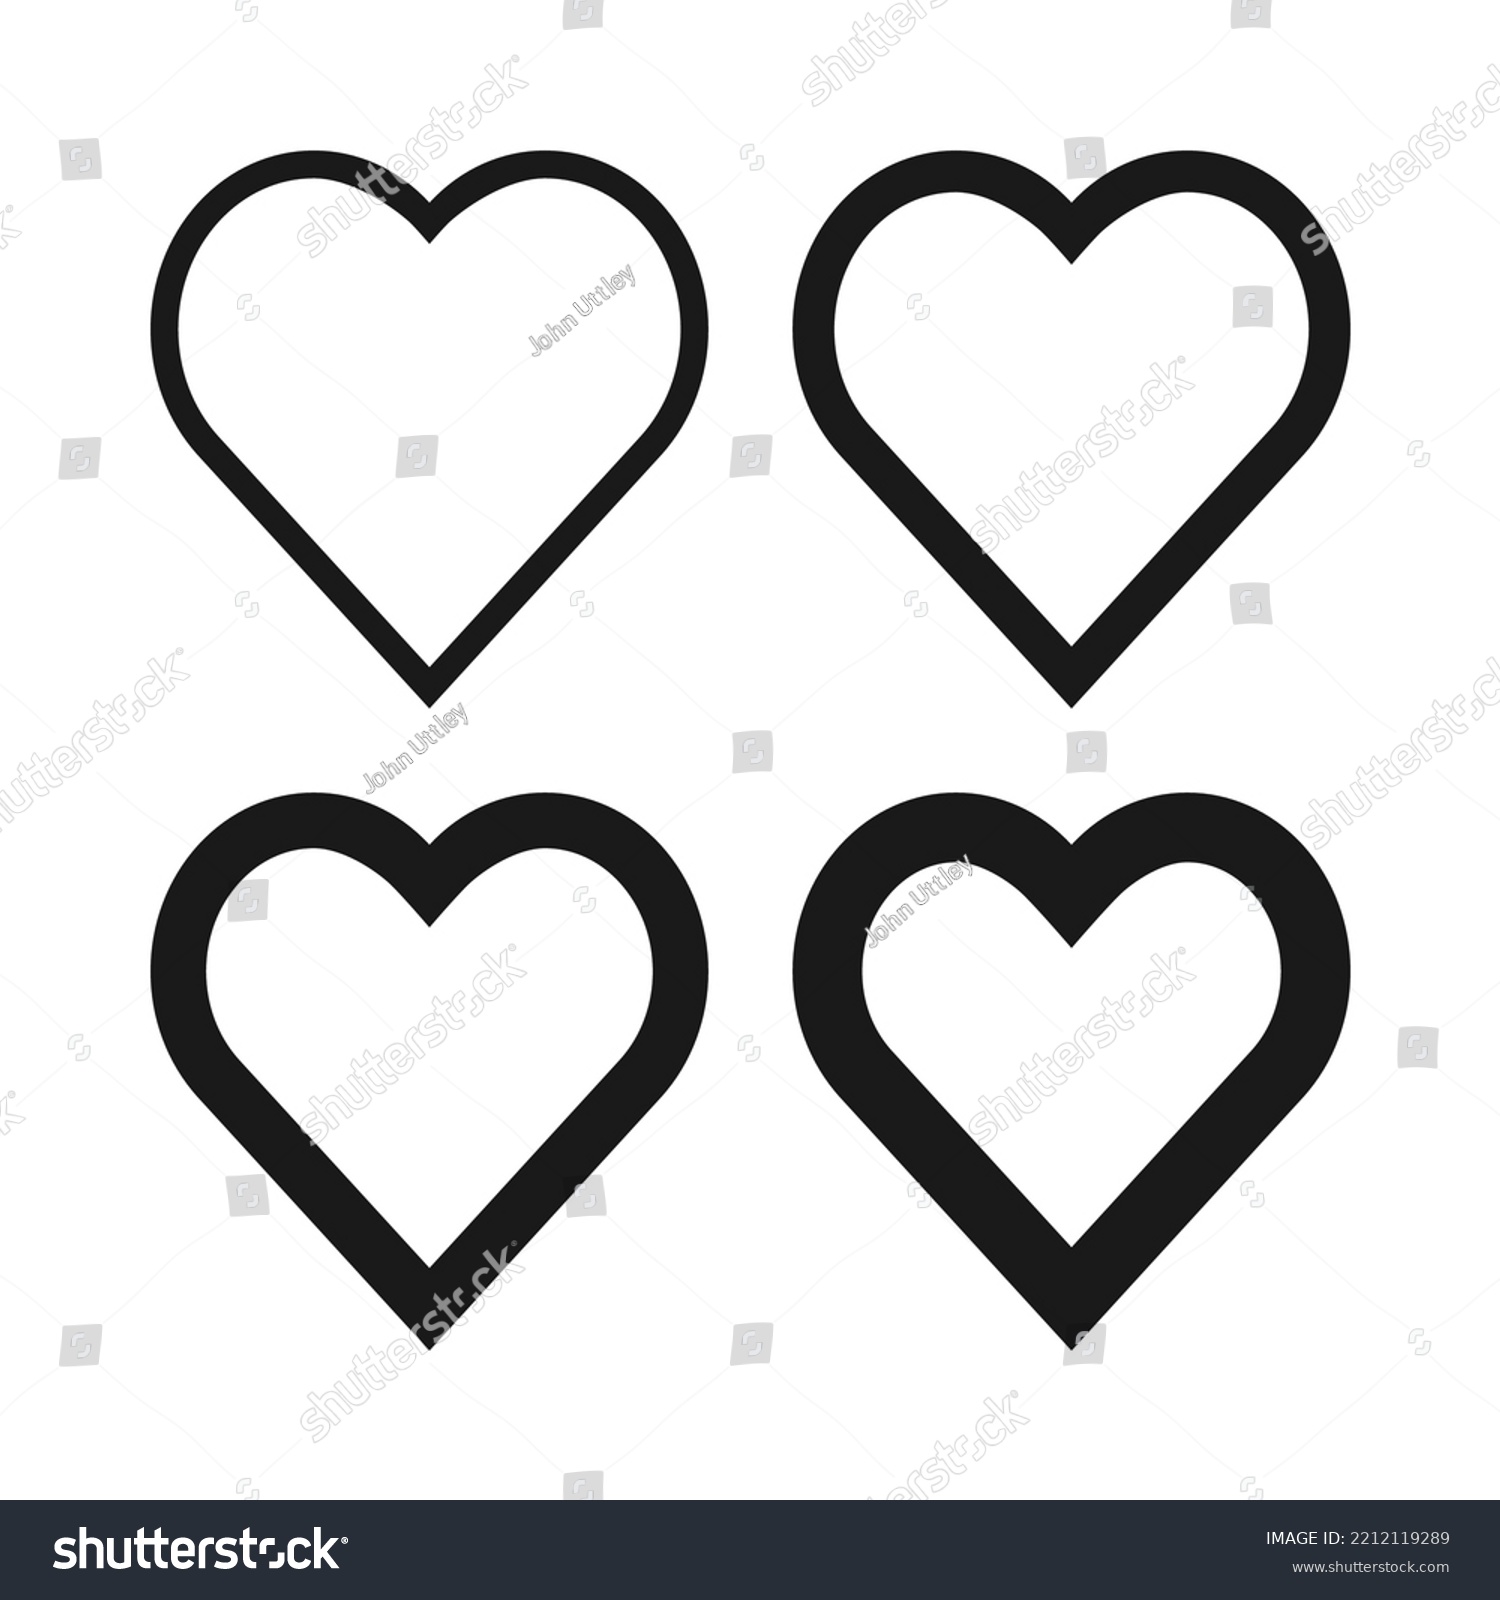 SVG of Hollow love heart stroke shape icons. A group of 4 line shapes with varying degrees of thickness. Isolated on a white background. svg